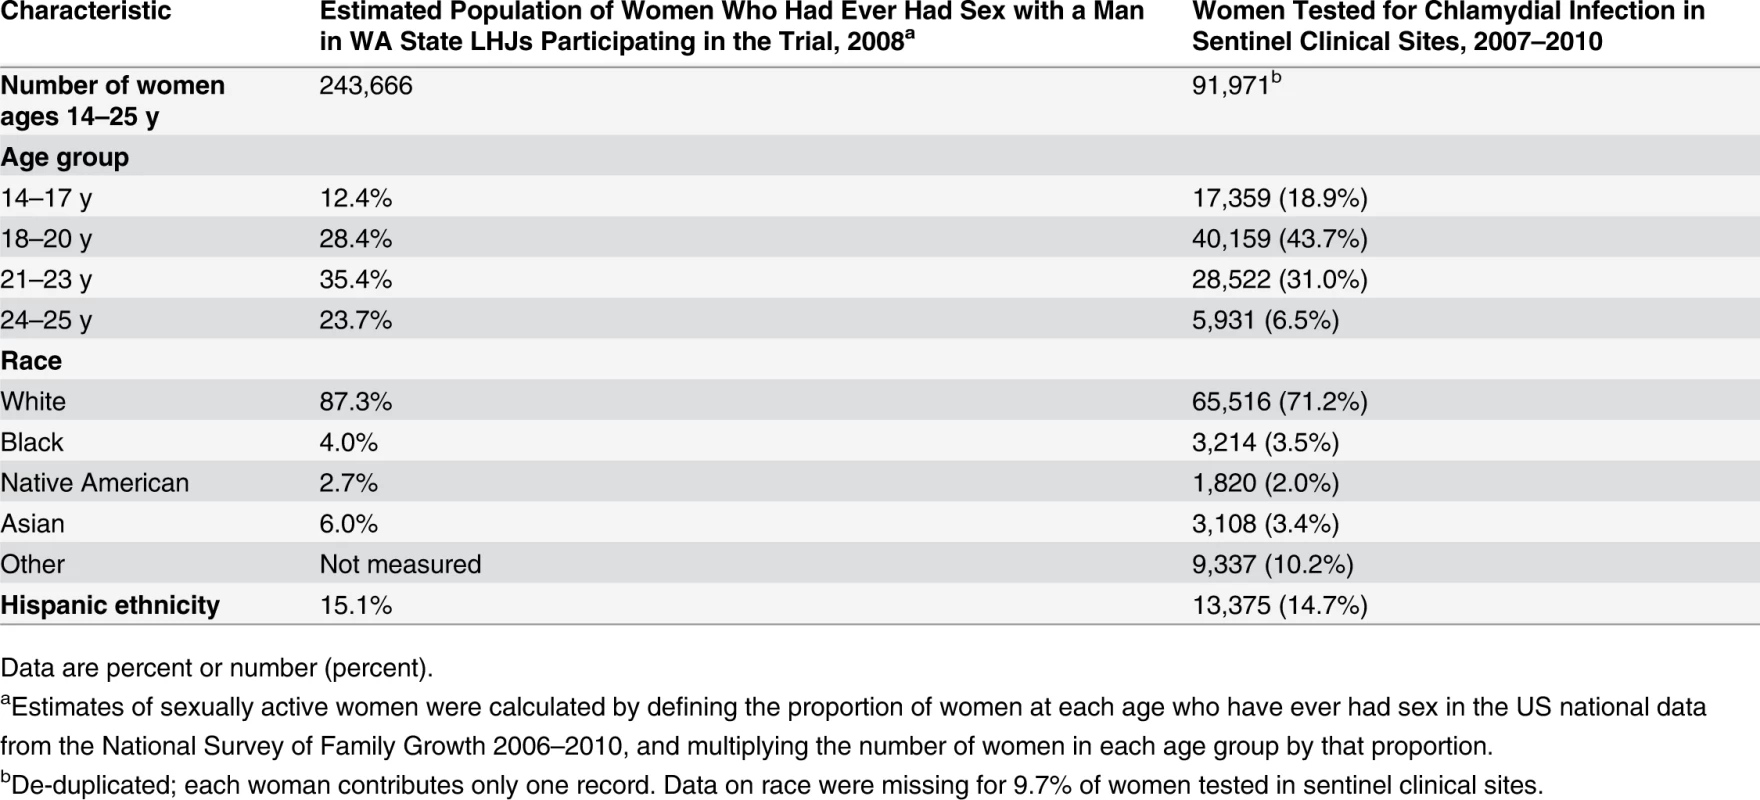 Characteristics of women tested for <i>C. trachomatis</i> in clinics providing outcome data for the trial compared to all women in areas of WA State participating in the trial.